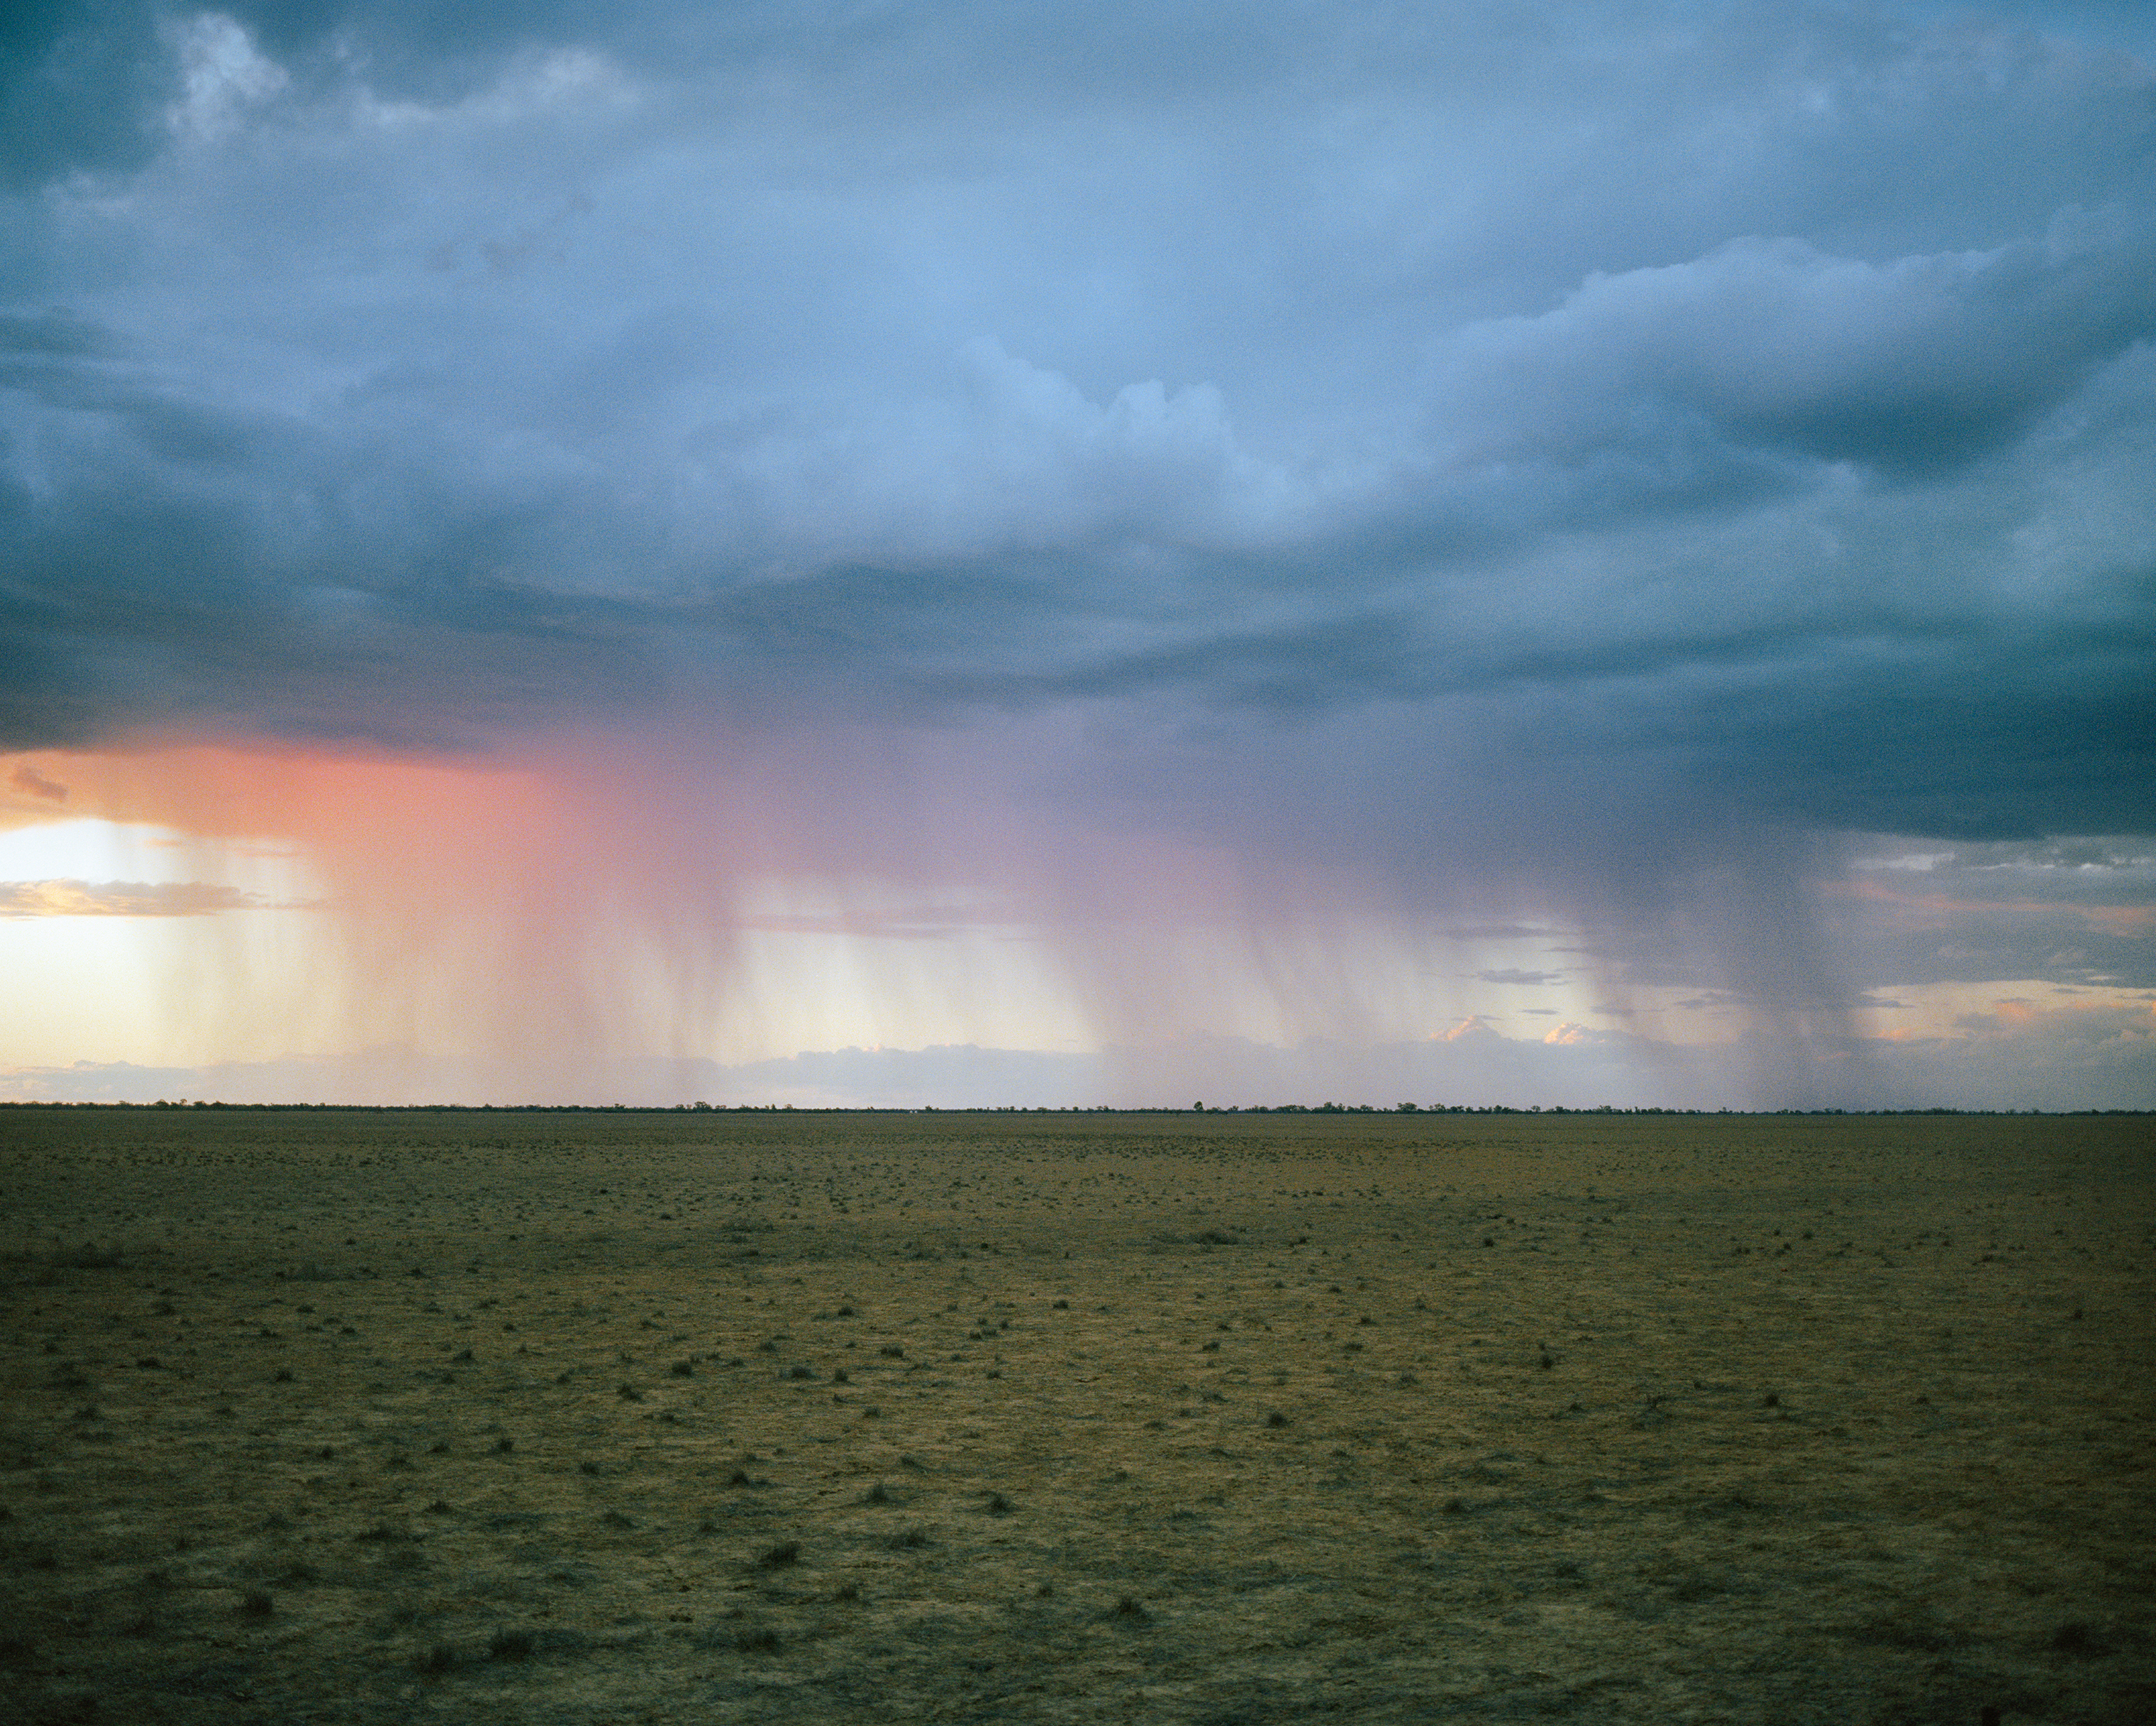 A storm moves across drought-affected land near Tuen, south of Cunnamulla, in Queensland in November. (Adam Ferguson for TIME)